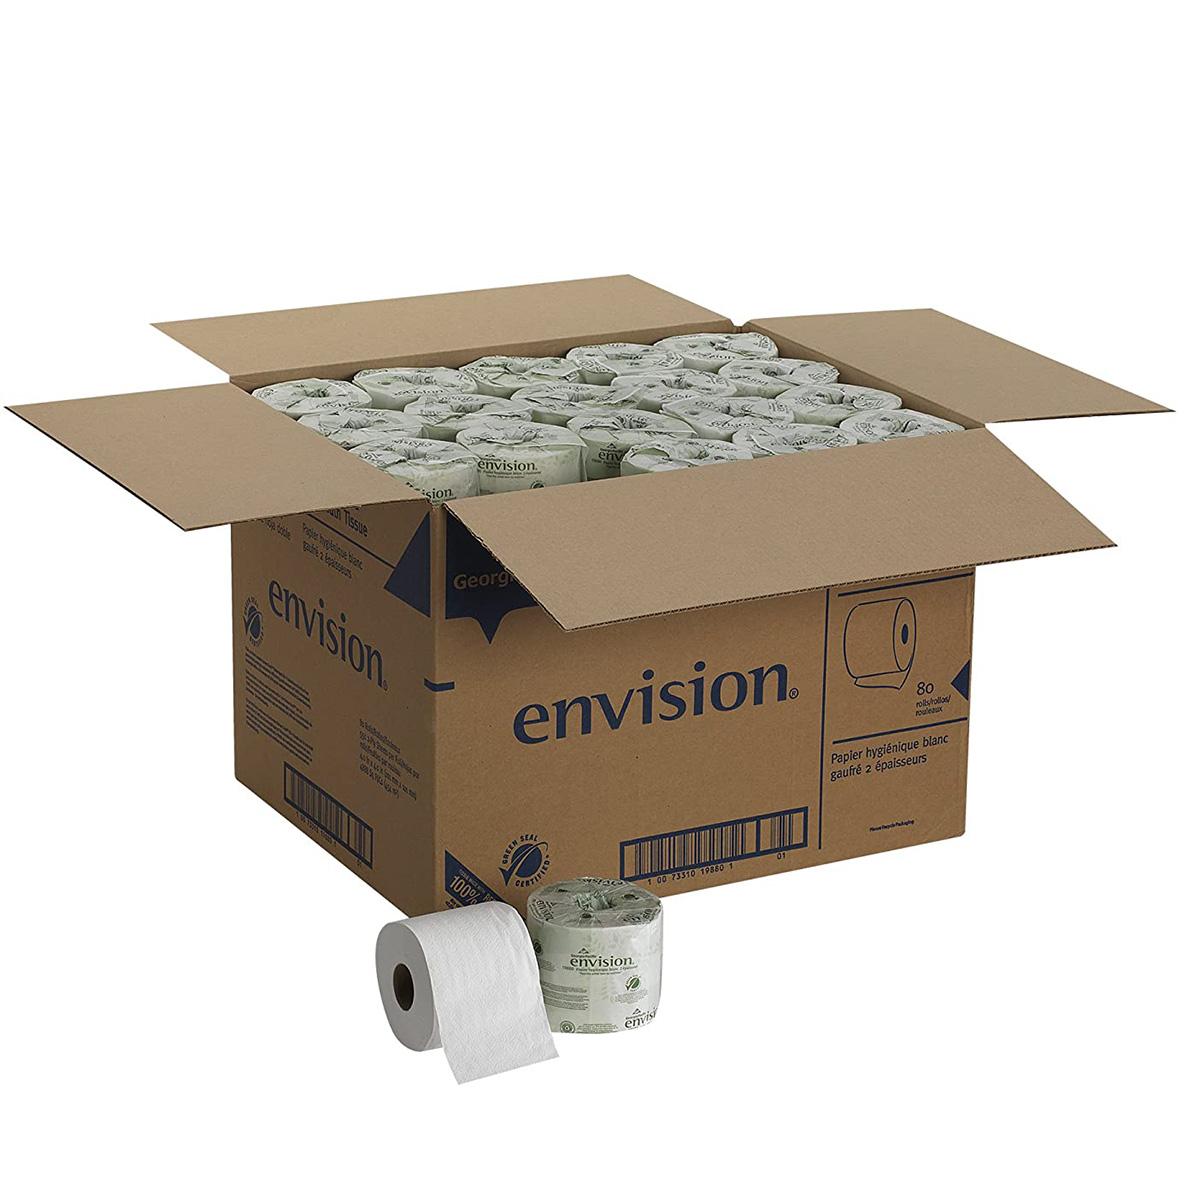 80-Rolls Georgia Pacific Envision 2-Ply Embossed Toilet Paper for $34.15 Shipped